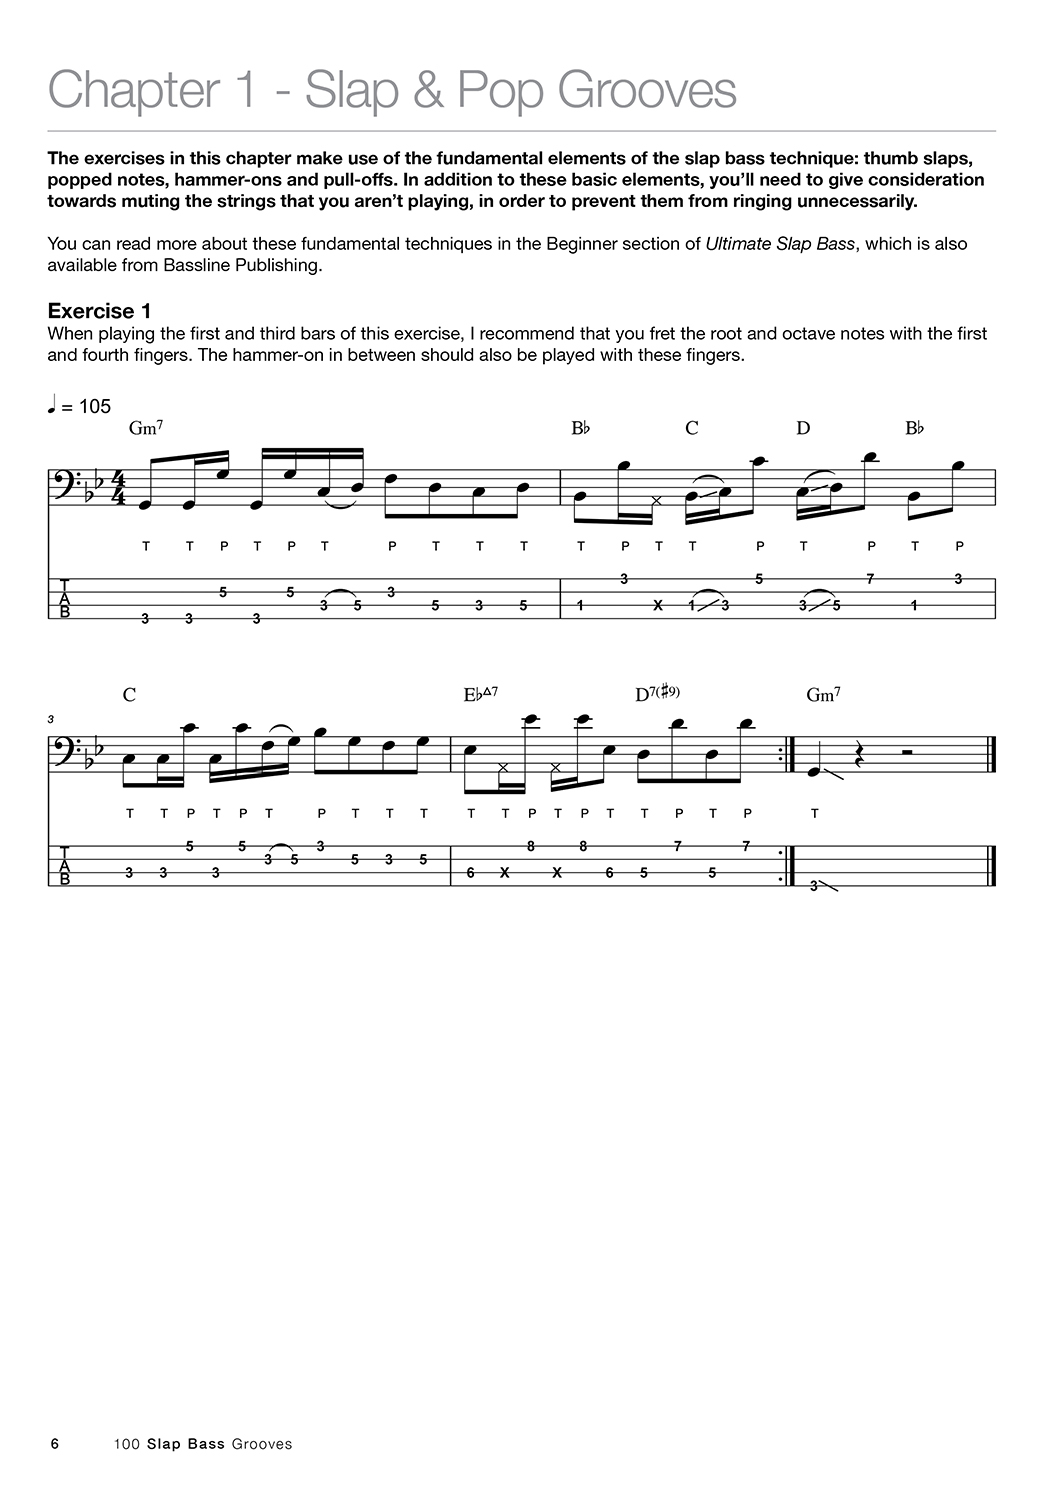 Sample page from 100 Slap Bass Grooves